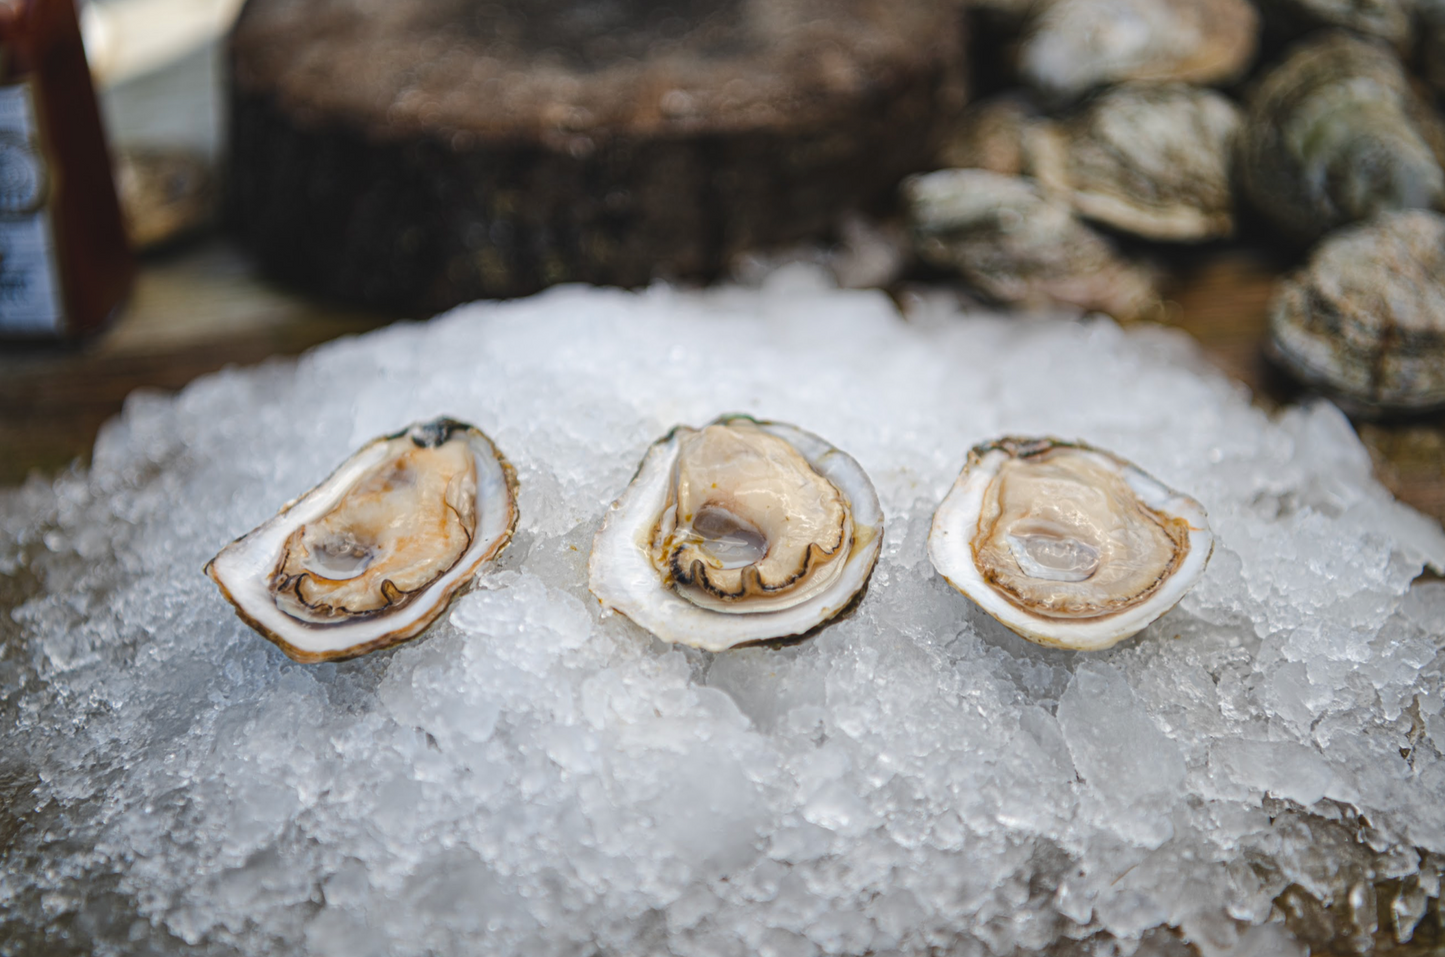 Some lesser known facts about oysters... like they're a health food. Who knew?